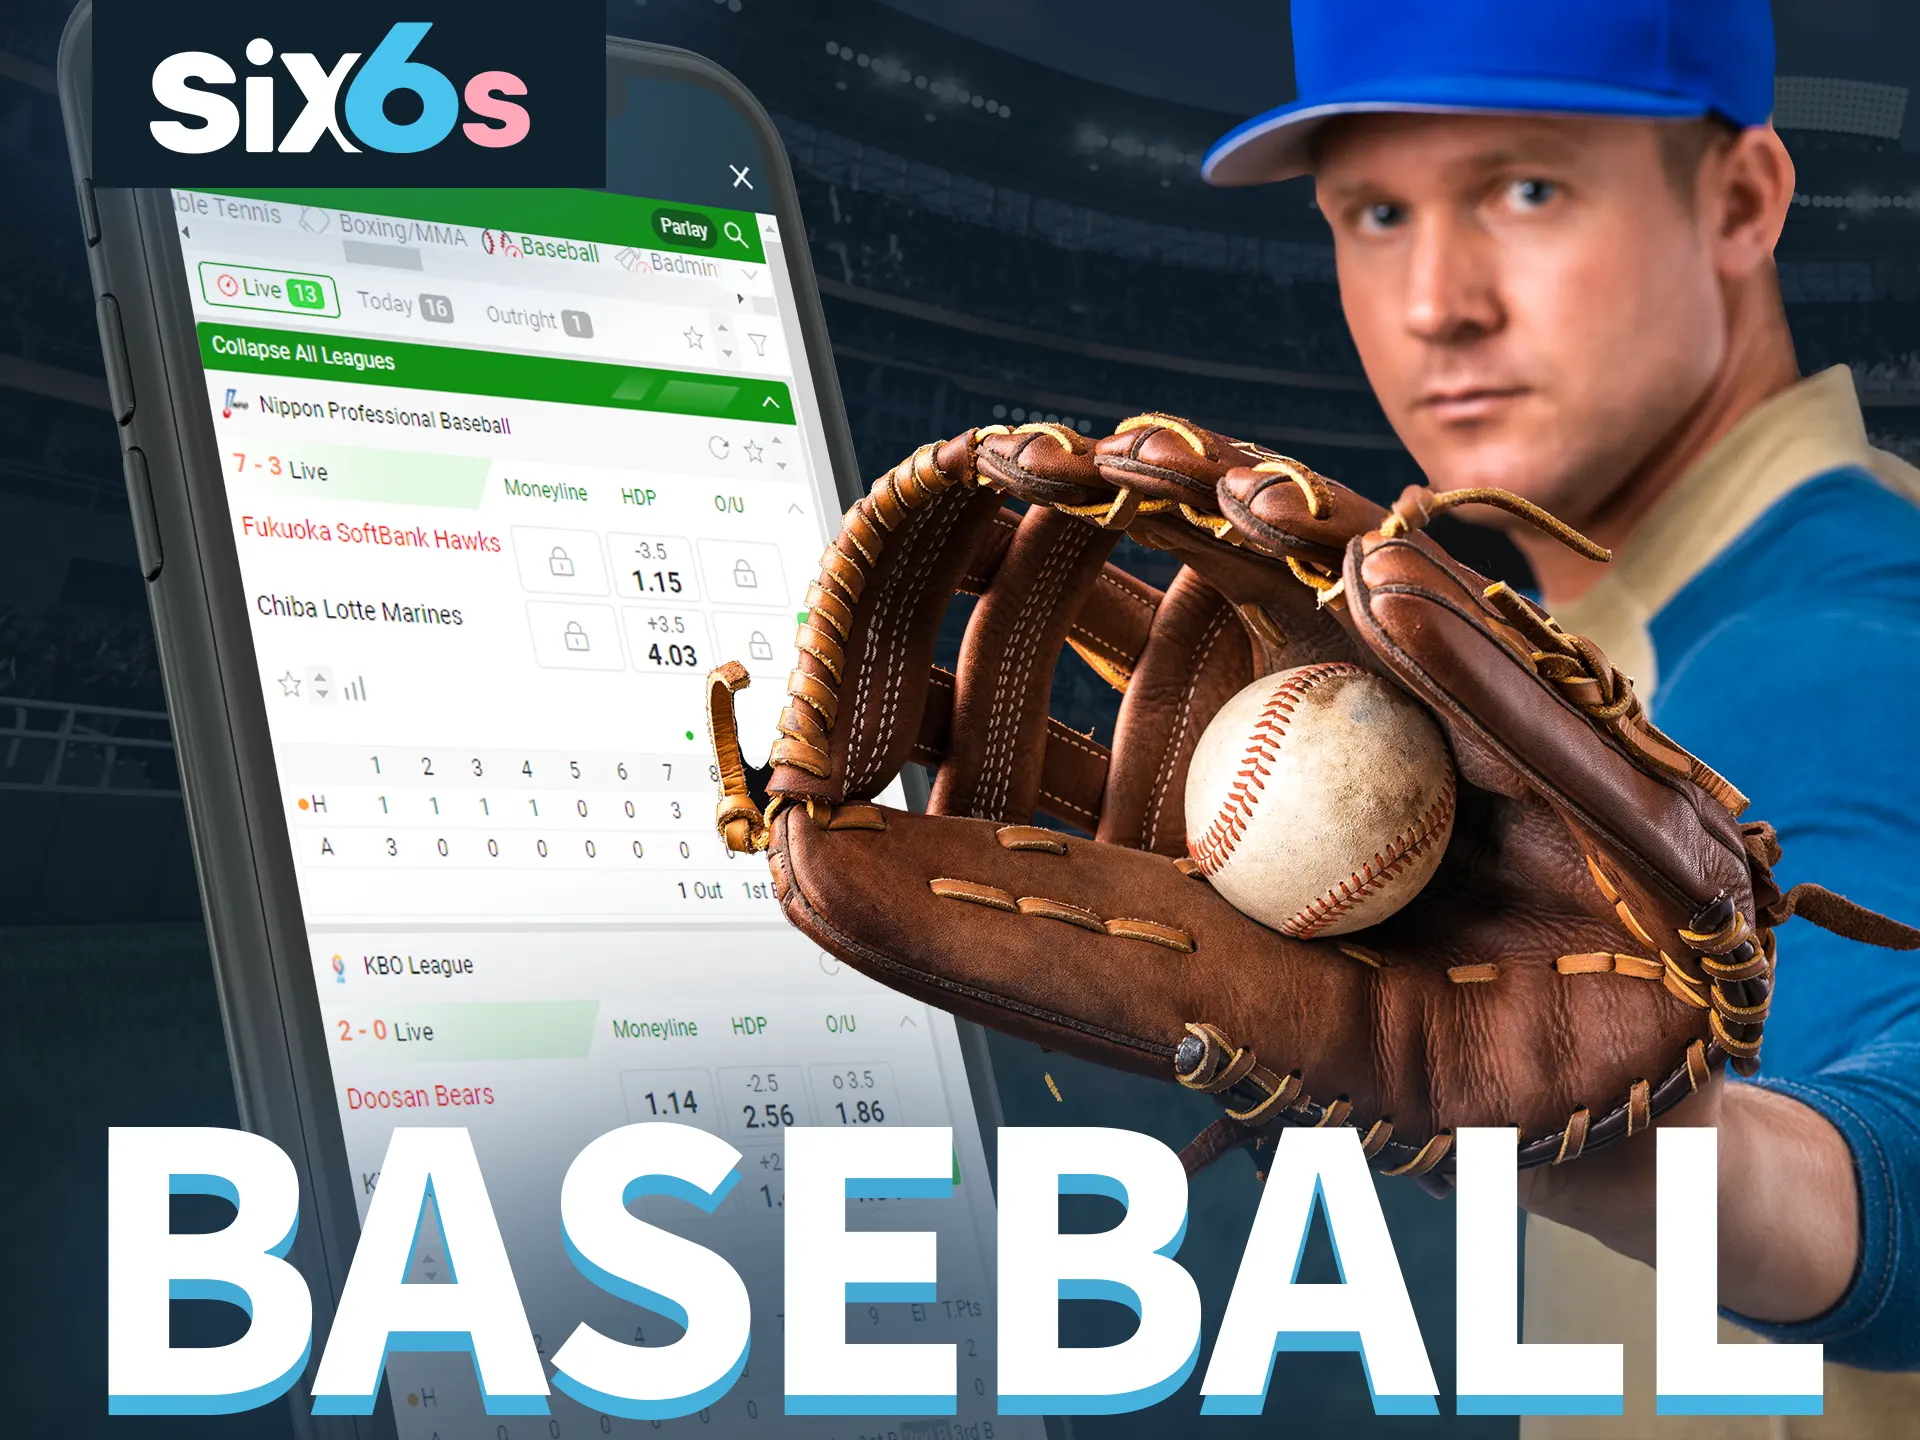 Bet on baseball tournaments with Six6s.